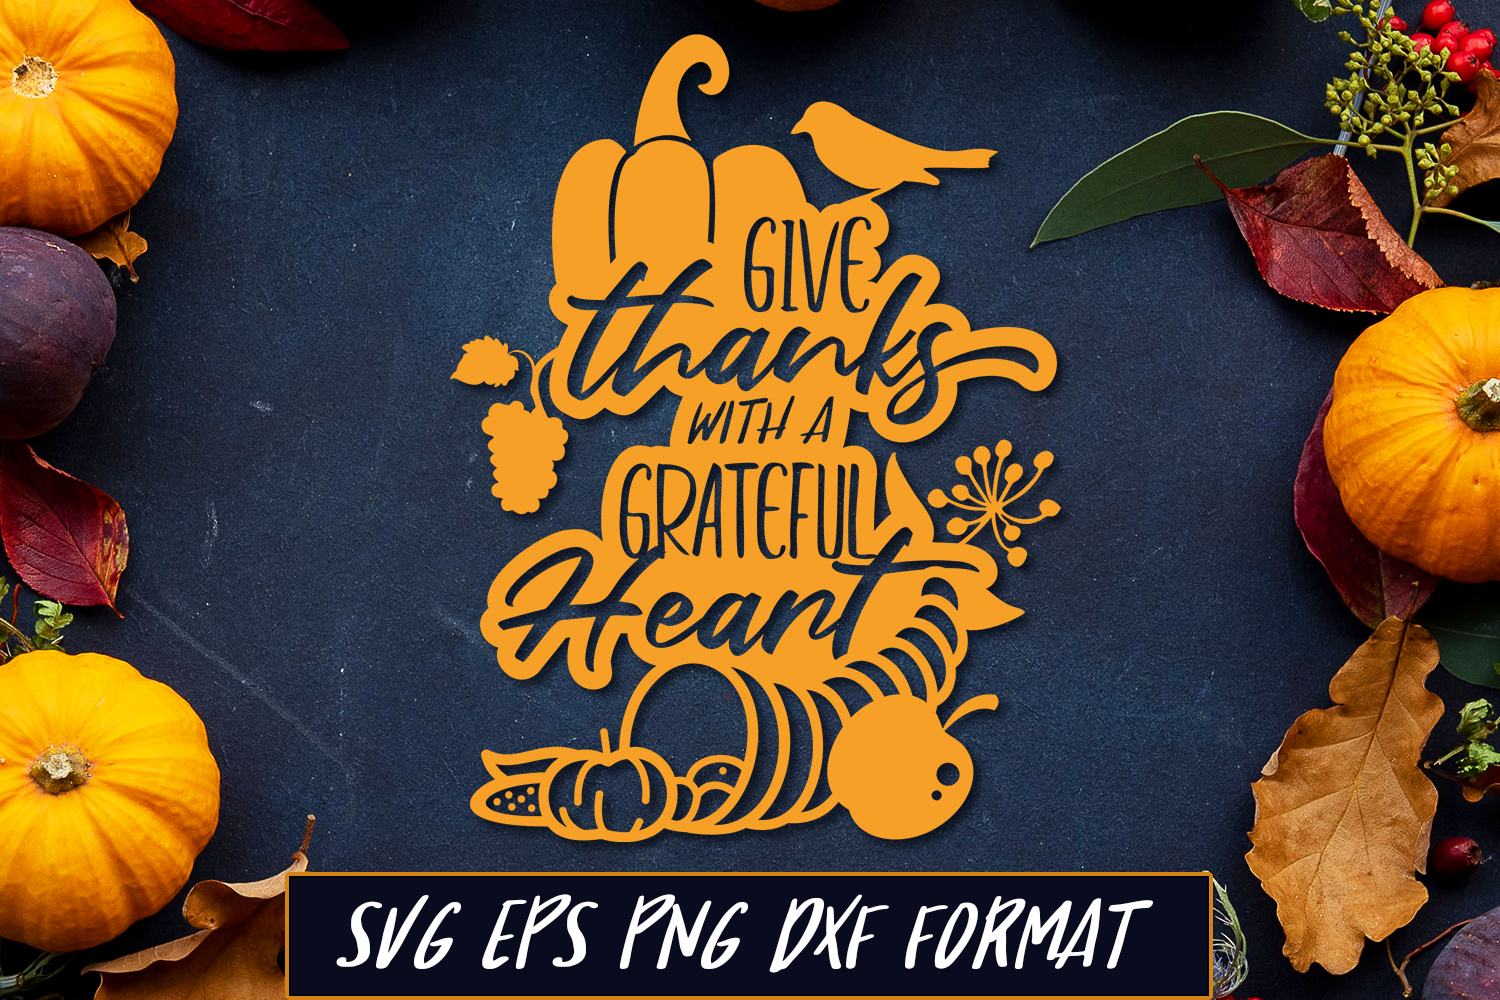 Give Thanks With A Grateful Heart Thanksgiving Svg Cut File By Craft N Cuts Thehungryjpeg Com